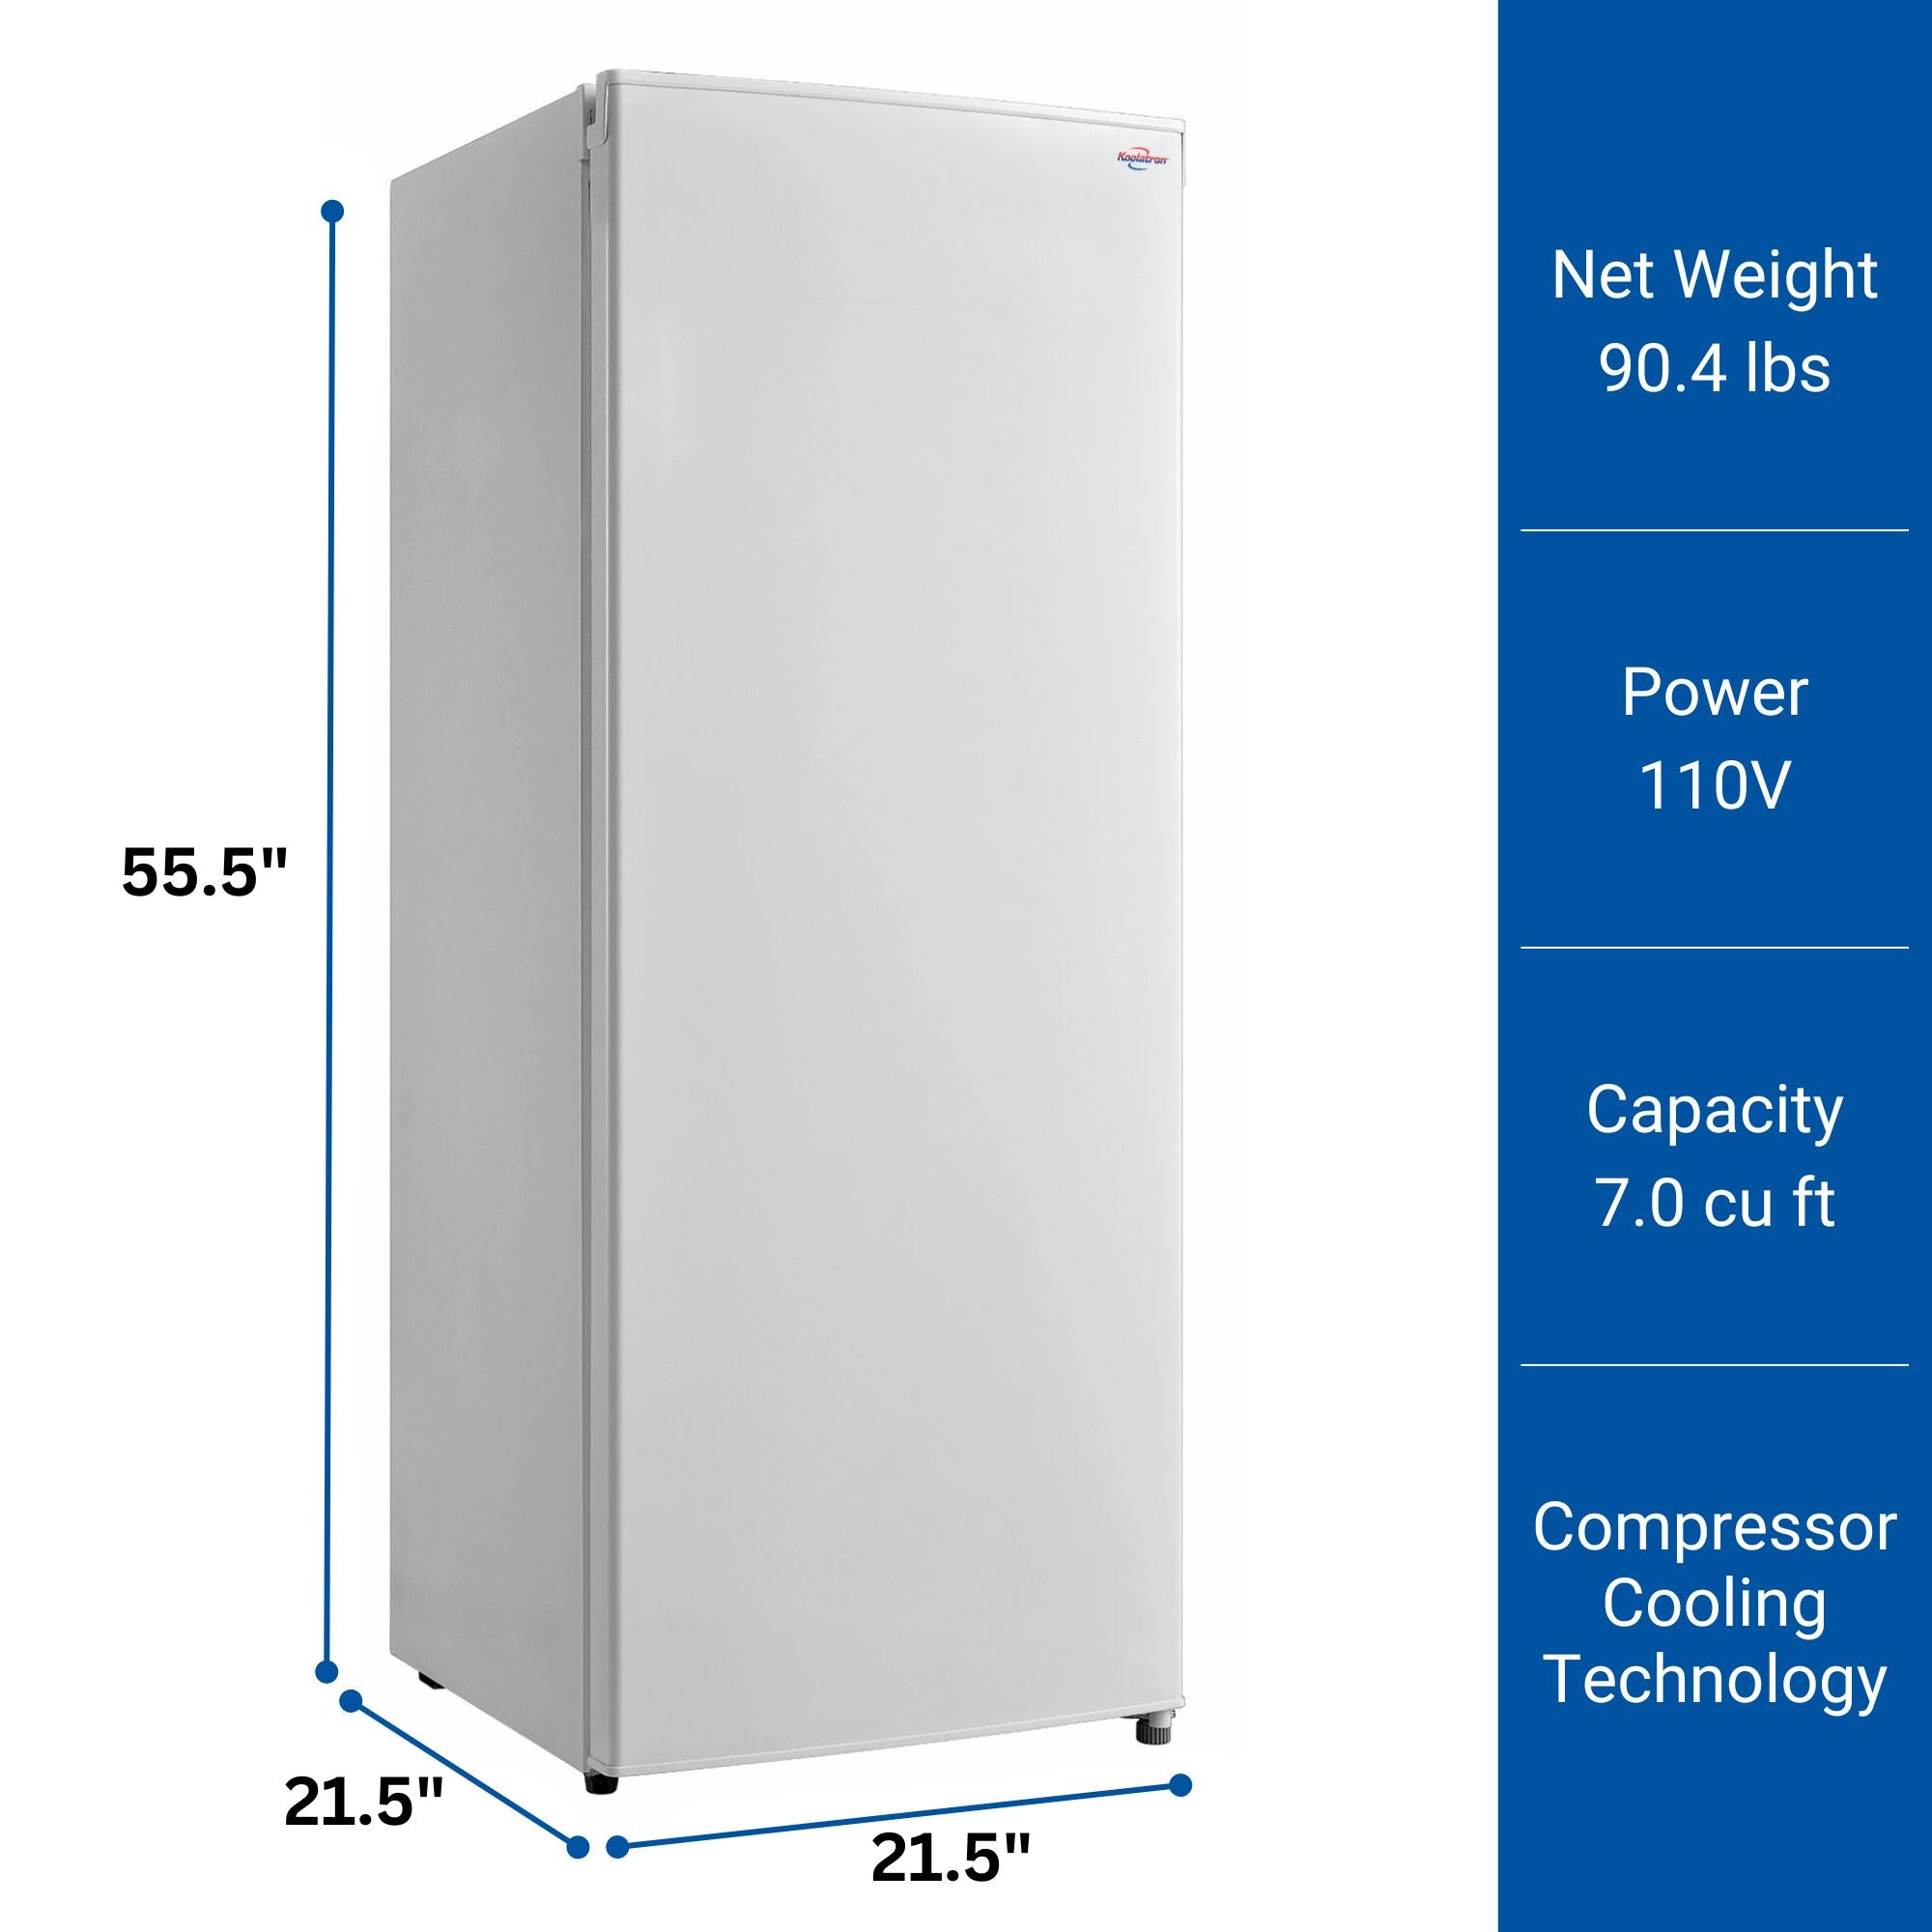  Product shot of white upright freezer with dimensions labeled on the left. Text to the right reads, "Net weight 90.4 lbs; Power 110V; Capacity 7.0 cu ft; Compressor cooling technology"